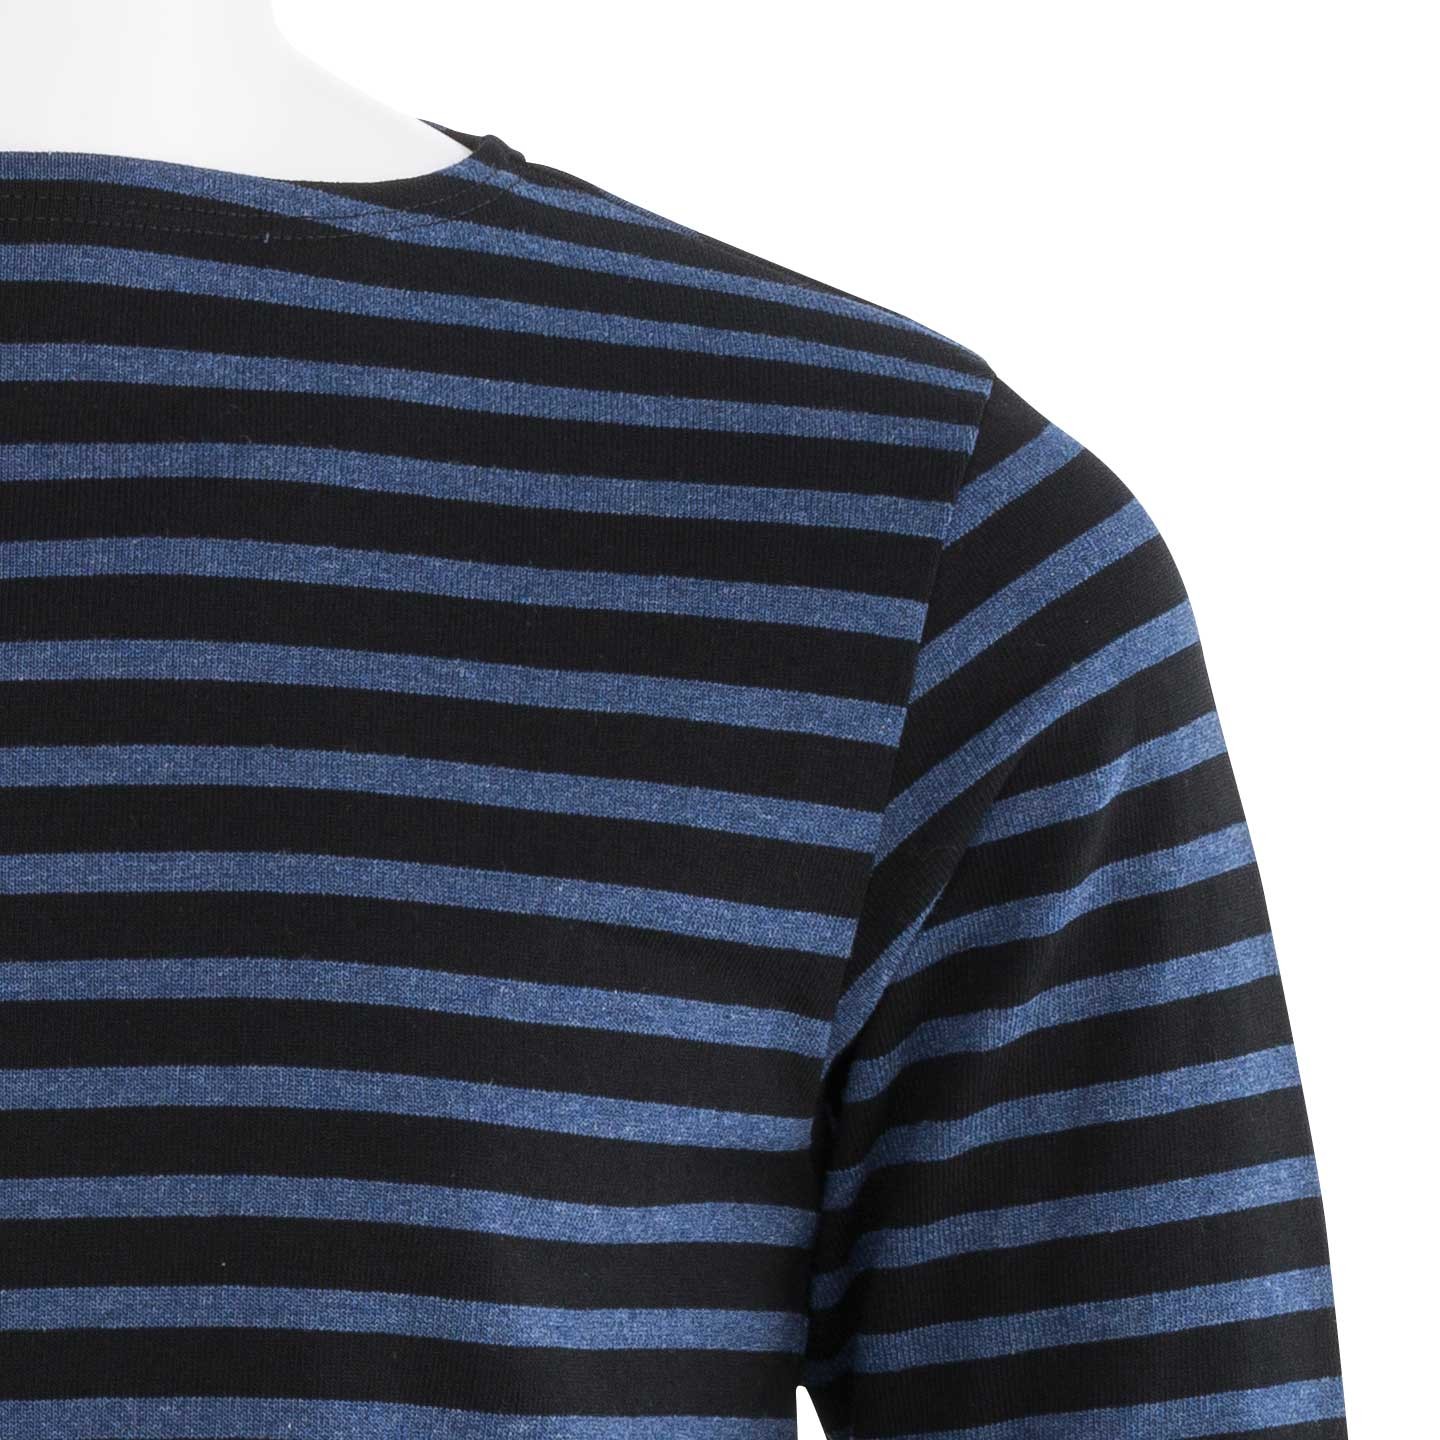 Striped shirt Black / Mixed Indigo, unisex made in France Orcival